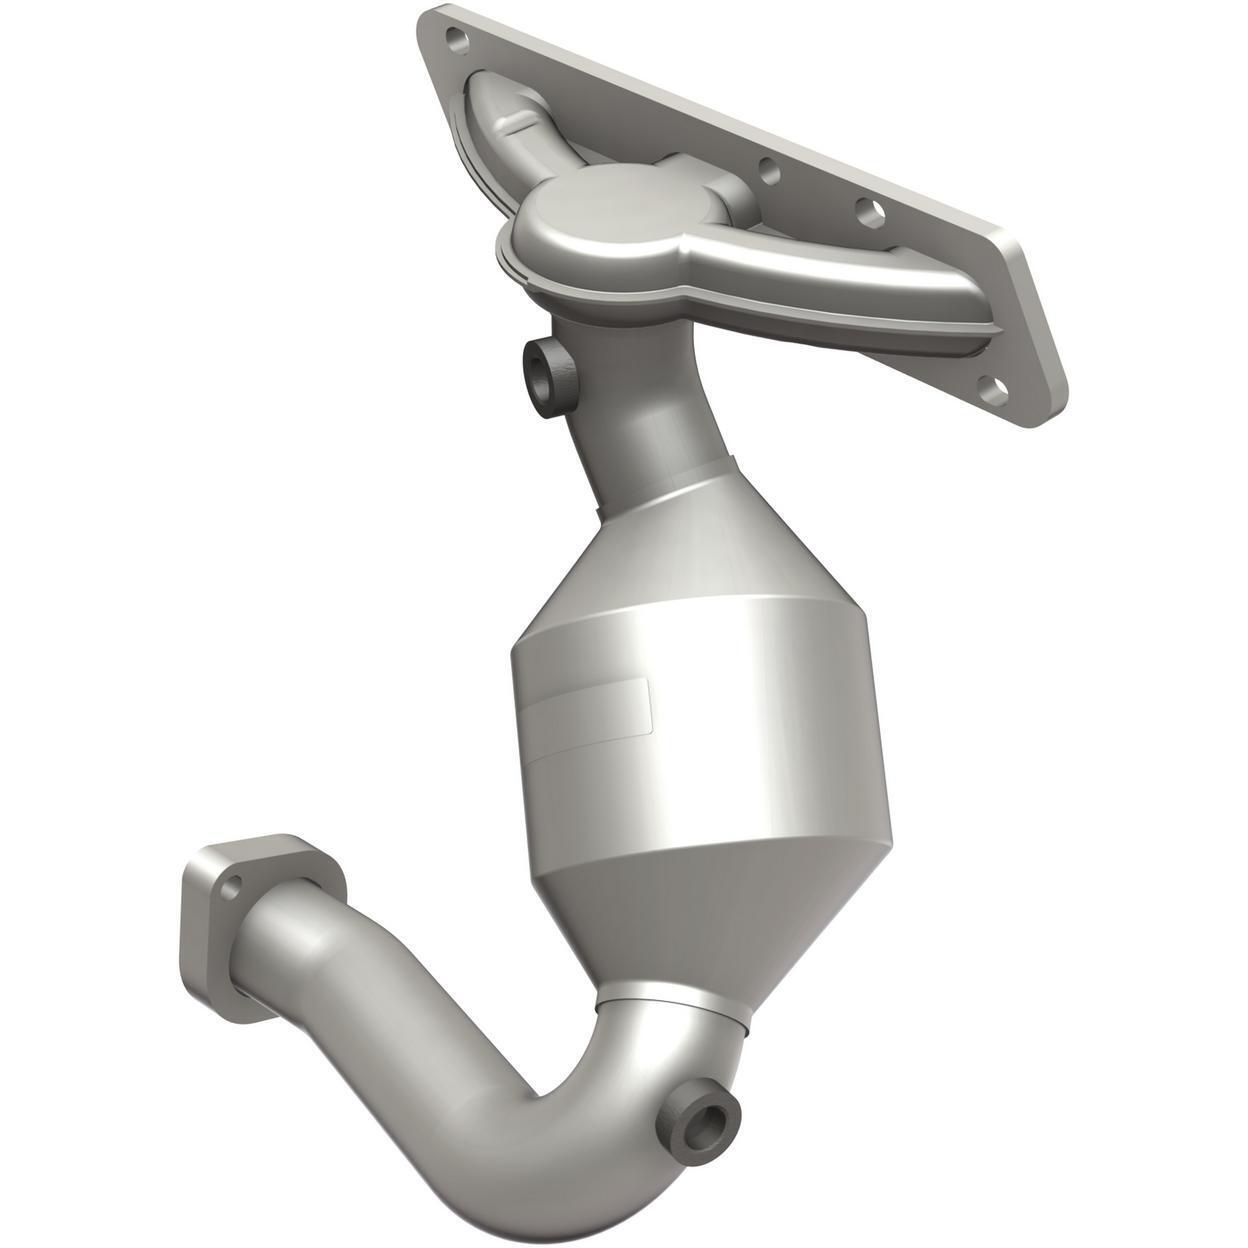 MagnaFlow Manifold Catalytic Converter Fits Fits: 1995-2000 Ford Contour, 1999-2